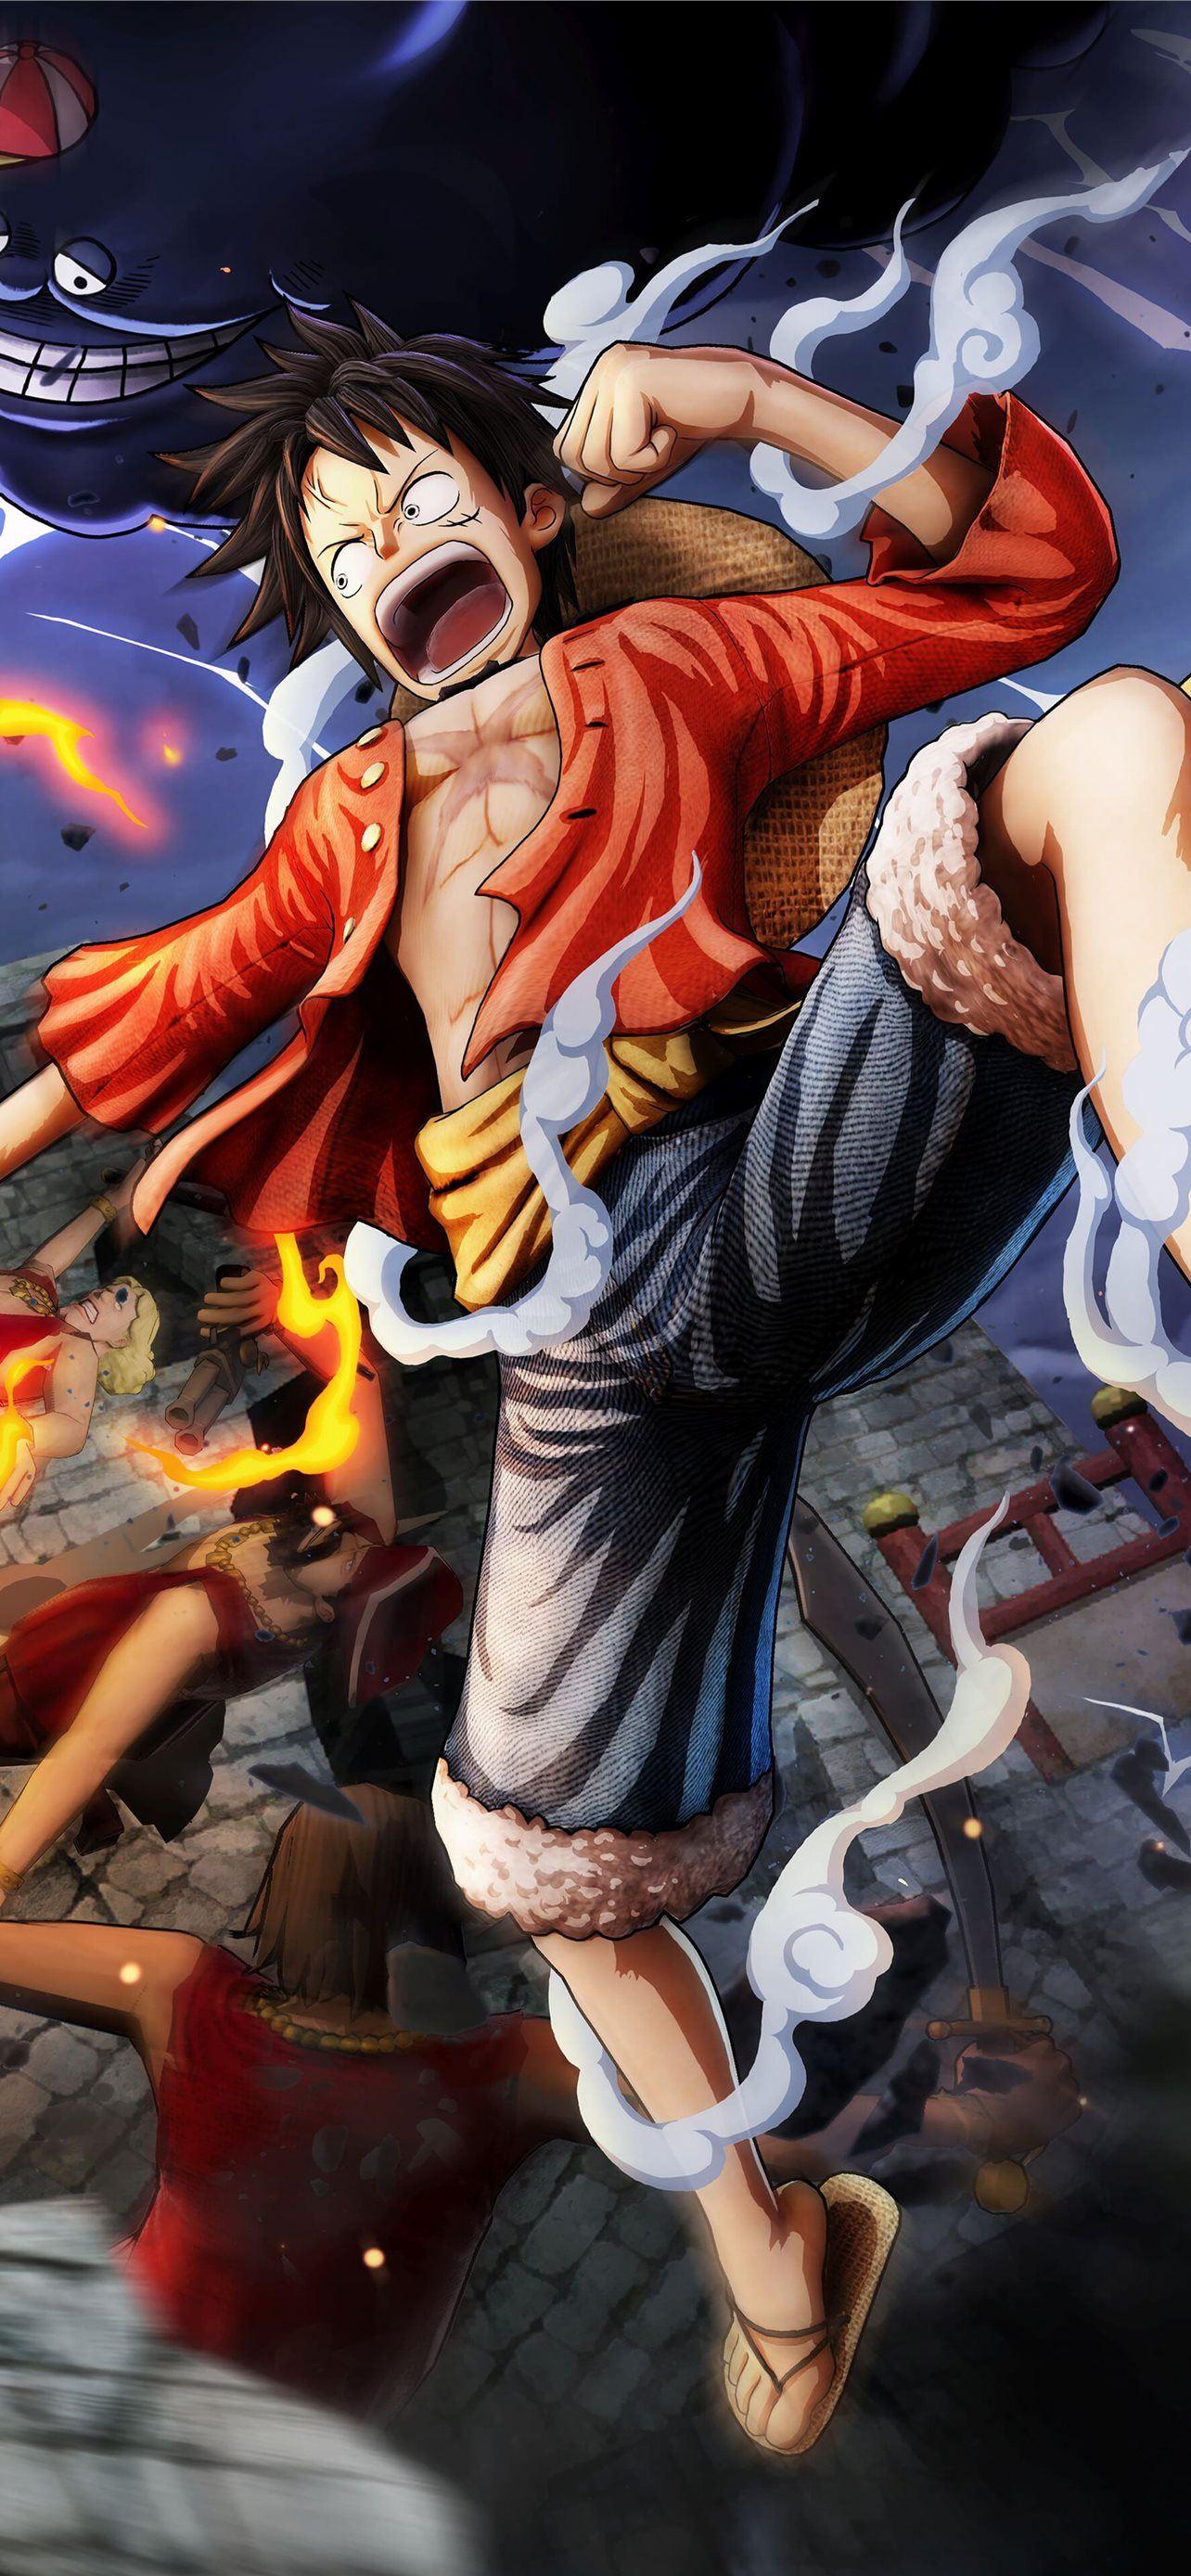 Anime One Piece Awesome HD iPhone Wallpaper